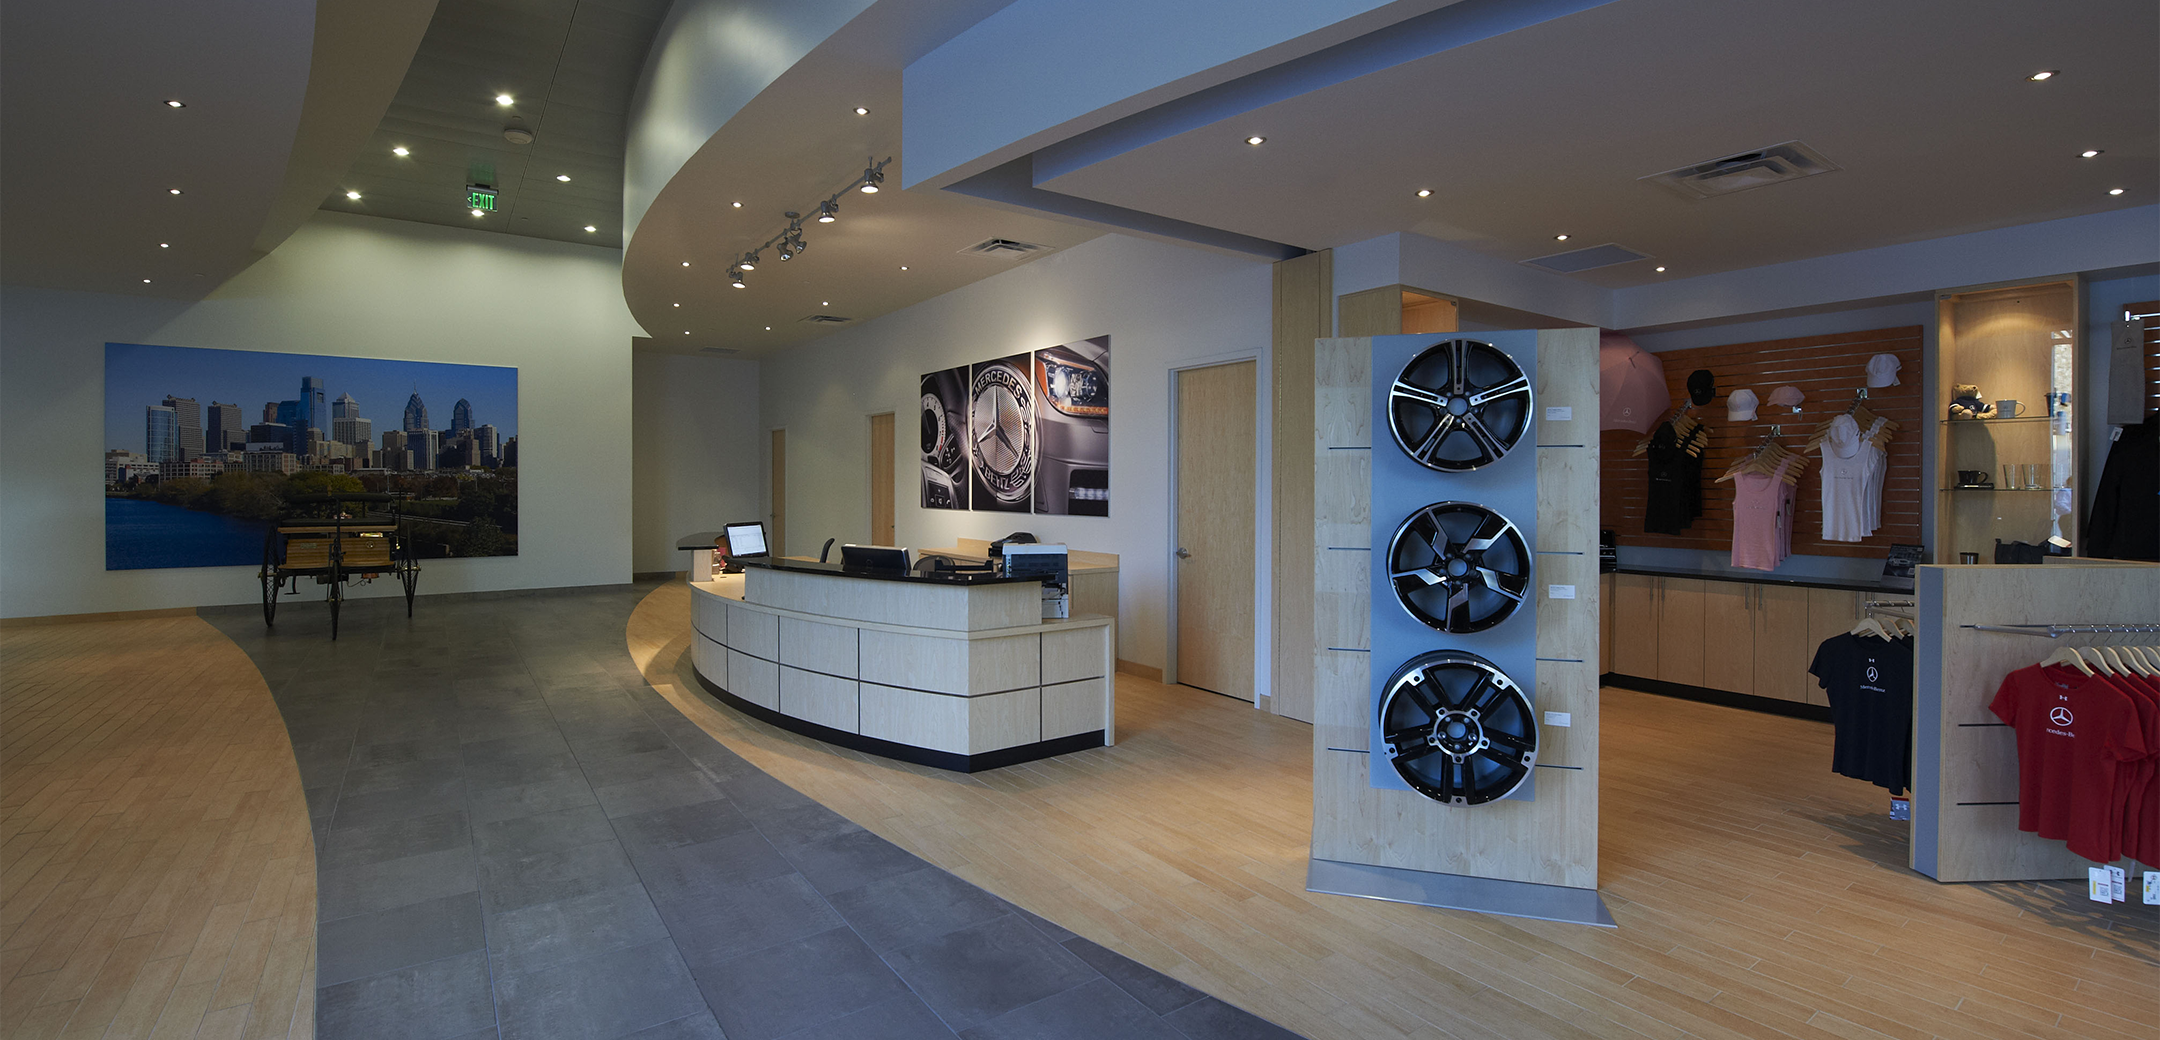 An interior view of the Euro Motorcars lobby reception desk, seating and cityscape photo in the background and gift shop on the right side.